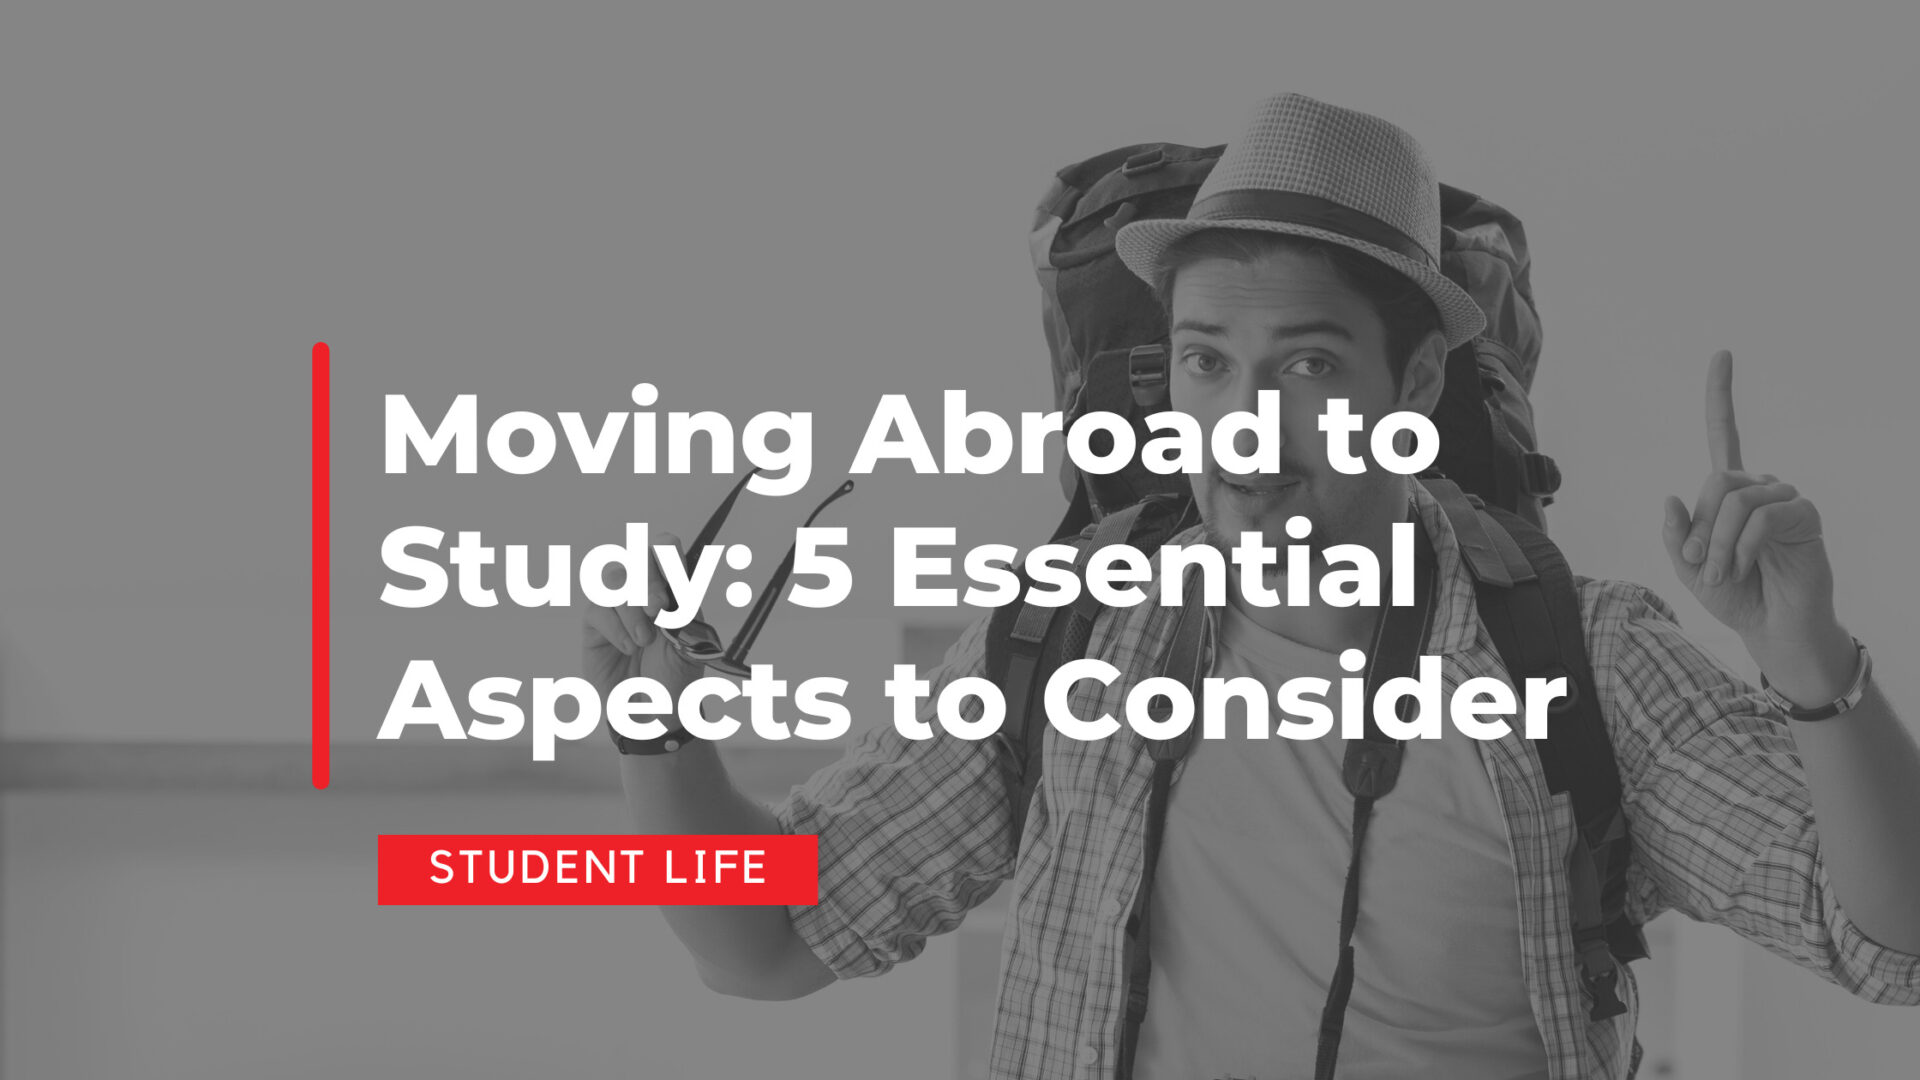 Moving Abroad to Study: 5 Essential Aspects to Consider